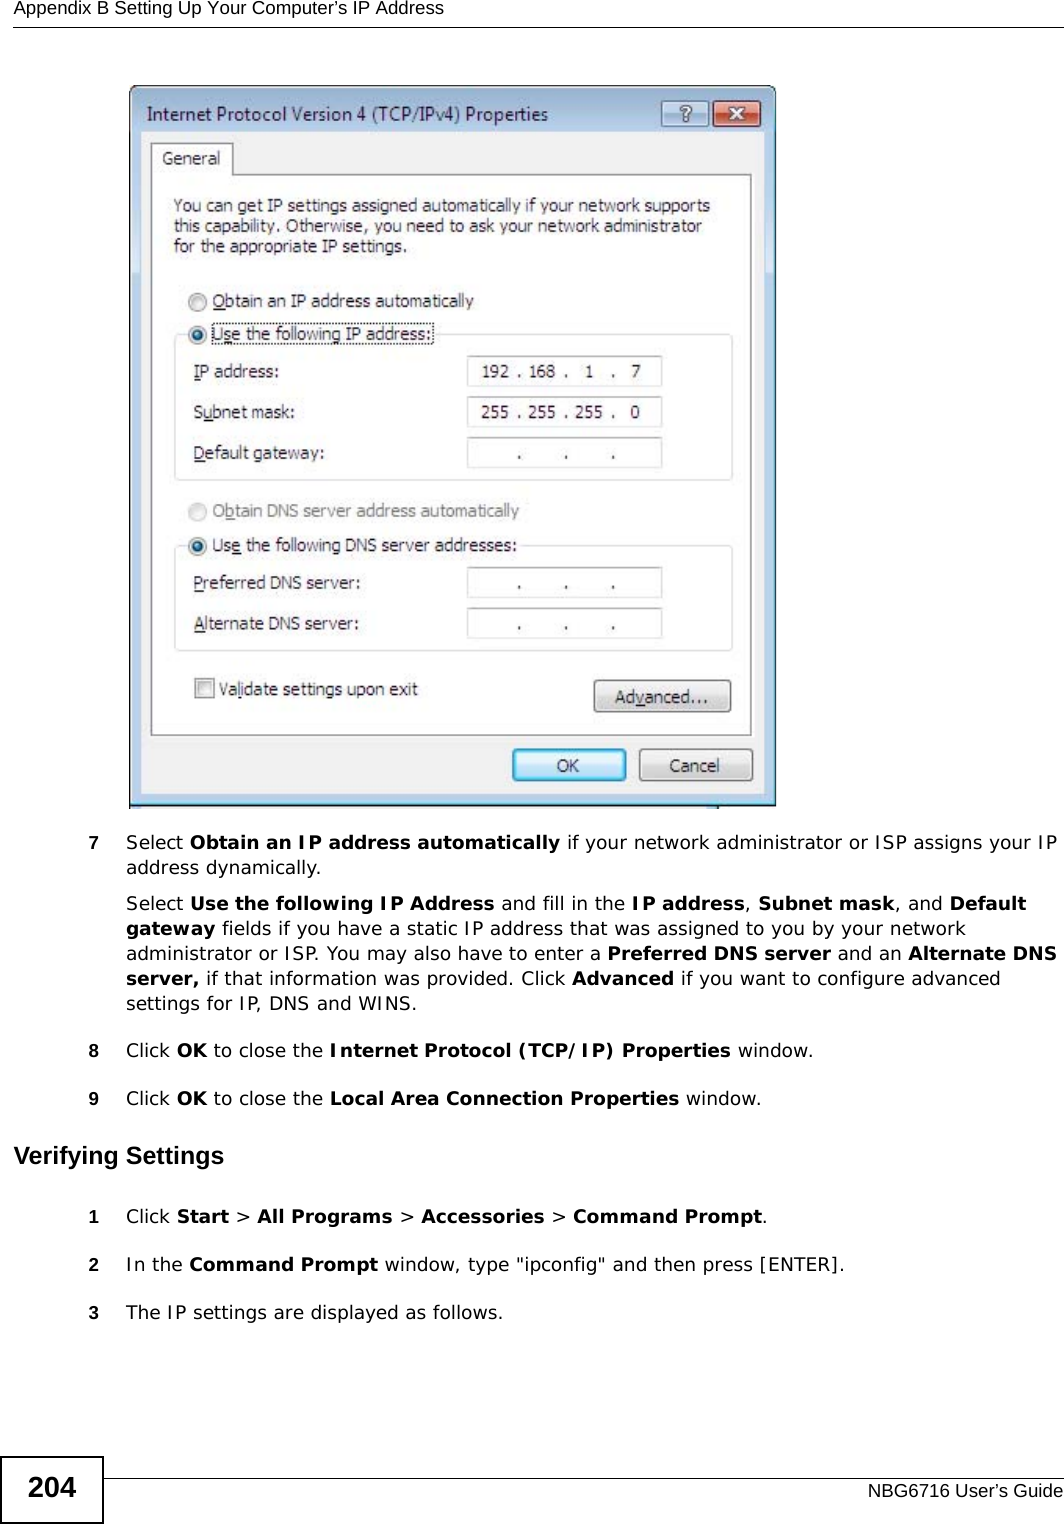 Appendix B Setting Up Your Computer’s IP AddressNBG6716 User’s Guide2047Select Obtain an IP address automatically if your network administrator or ISP assigns your IP address dynamically.Select Use the following IP Address and fill in the IP address, Subnet mask, and Default gateway fields if you have a static IP address that was assigned to you by your network administrator or ISP. You may also have to enter a Preferred DNS server and an Alternate DNS server, if that information was provided. Click Advanced if you want to configure advanced settings for IP, DNS and WINS. 8Click OK to close the Internet Protocol (TCP/IP) Properties window.9Click OK to close the Local Area Connection Properties window.Verifying Settings1Click Start &gt; All Programs &gt; Accessories &gt; Command Prompt.2In the Command Prompt window, type &quot;ipconfig&quot; and then press [ENTER]. 3The IP settings are displayed as follows.